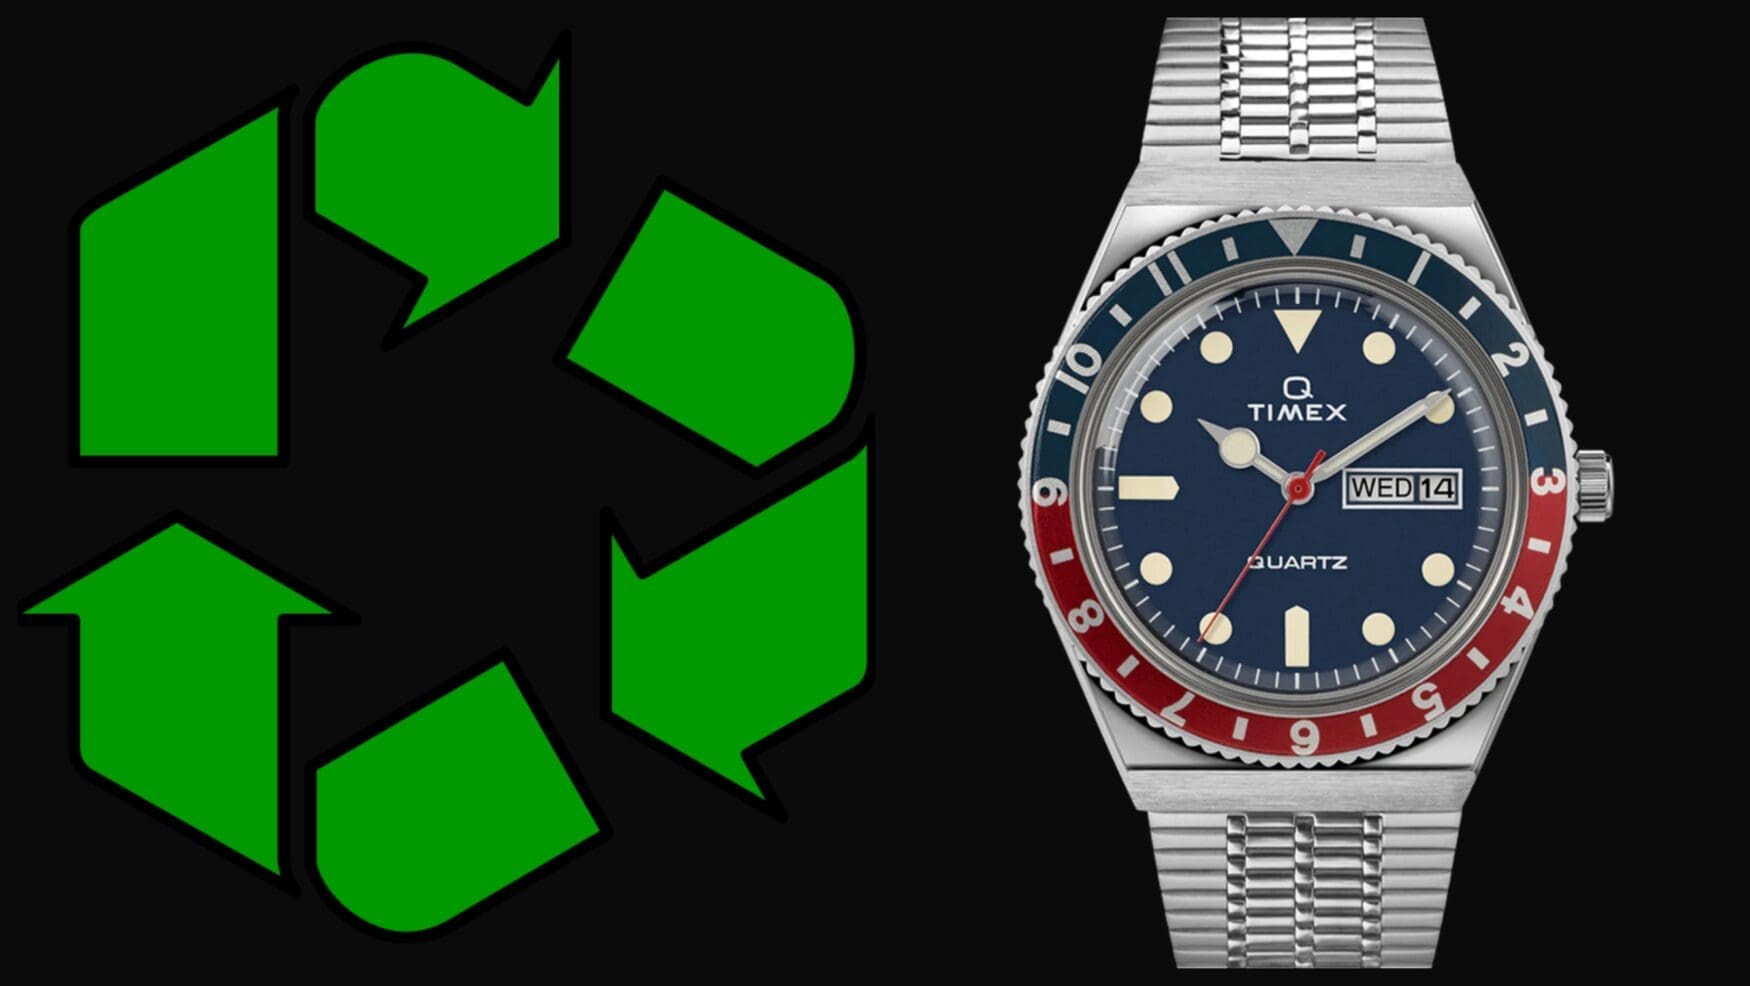 Recycle your broken watch for free, while getting cash off a new Timex